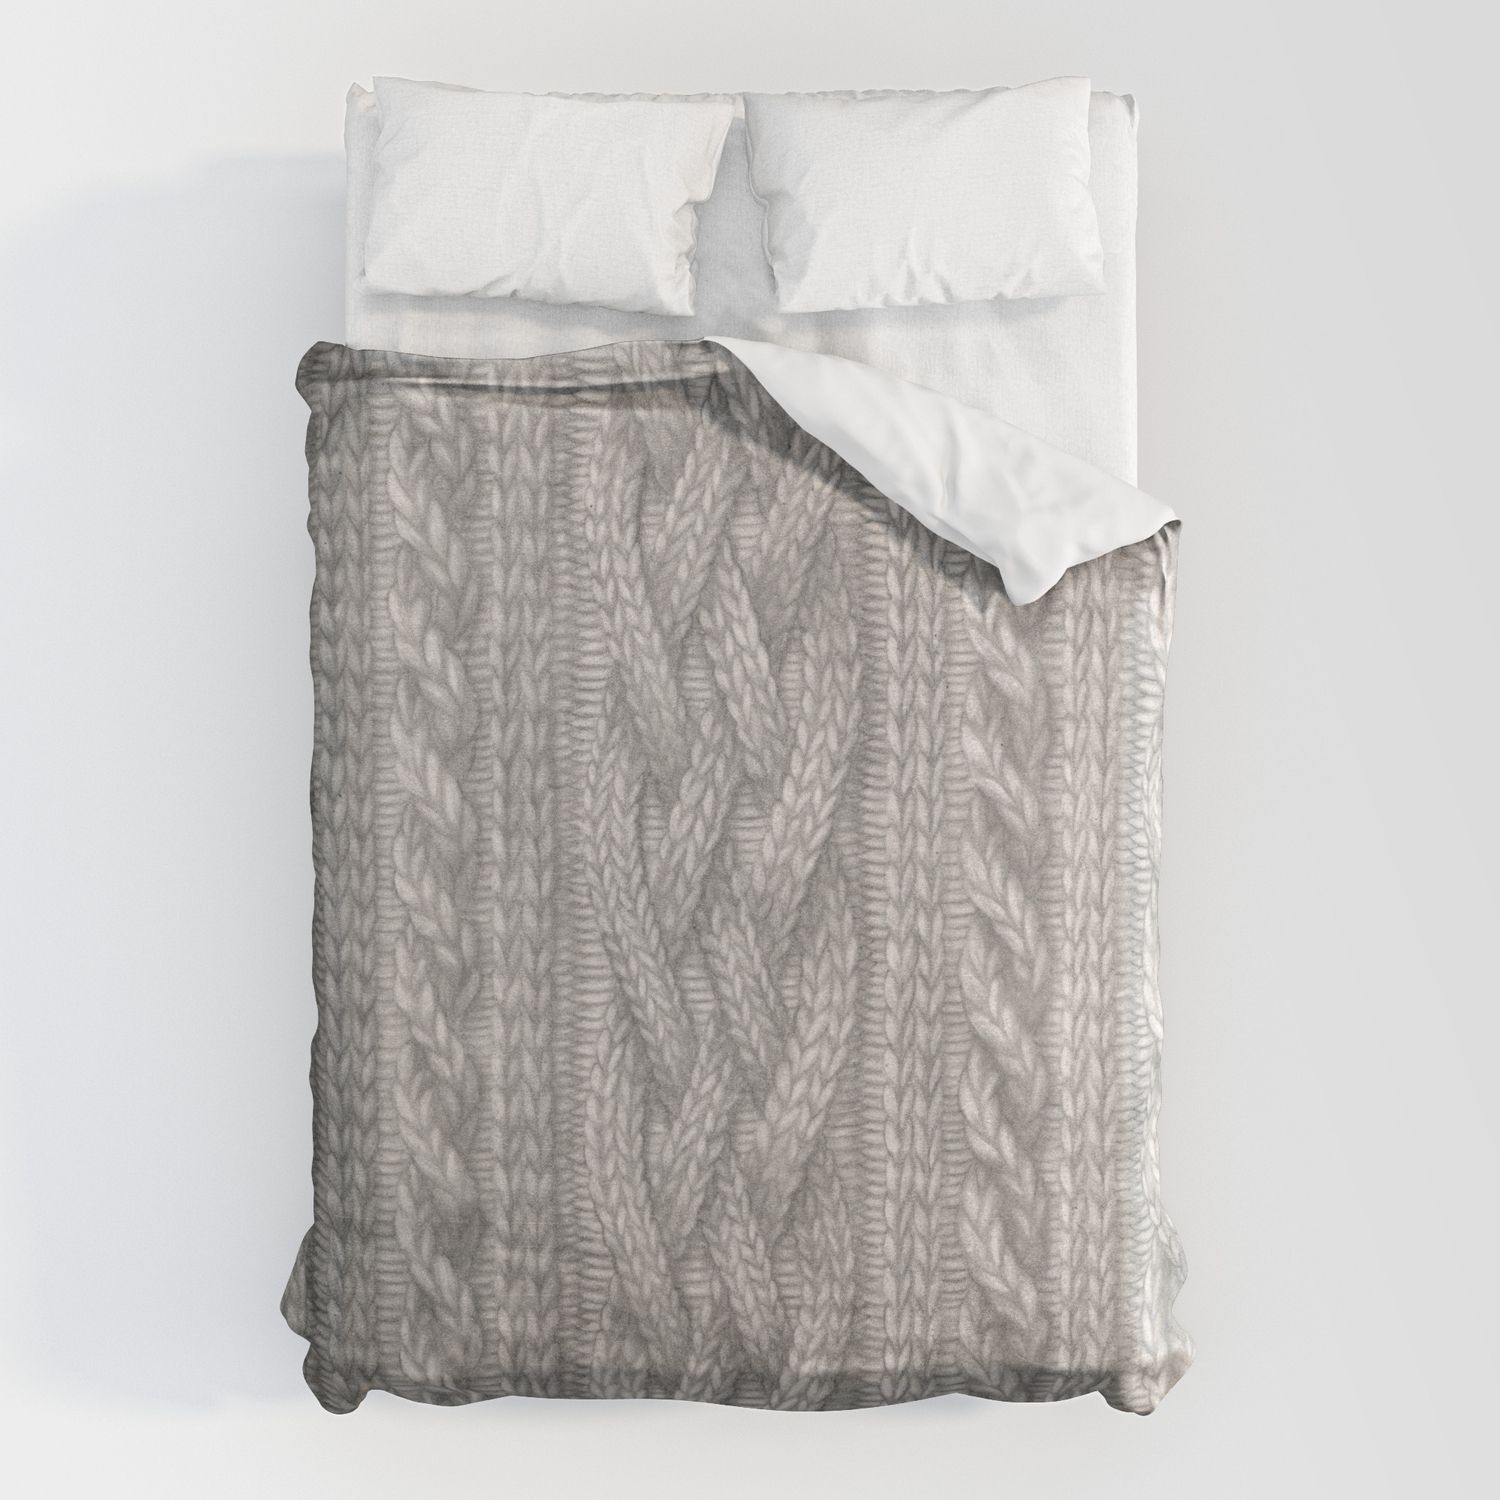 Cable Knit Duvet Cover By Zhfield, Knit Duvet Cover